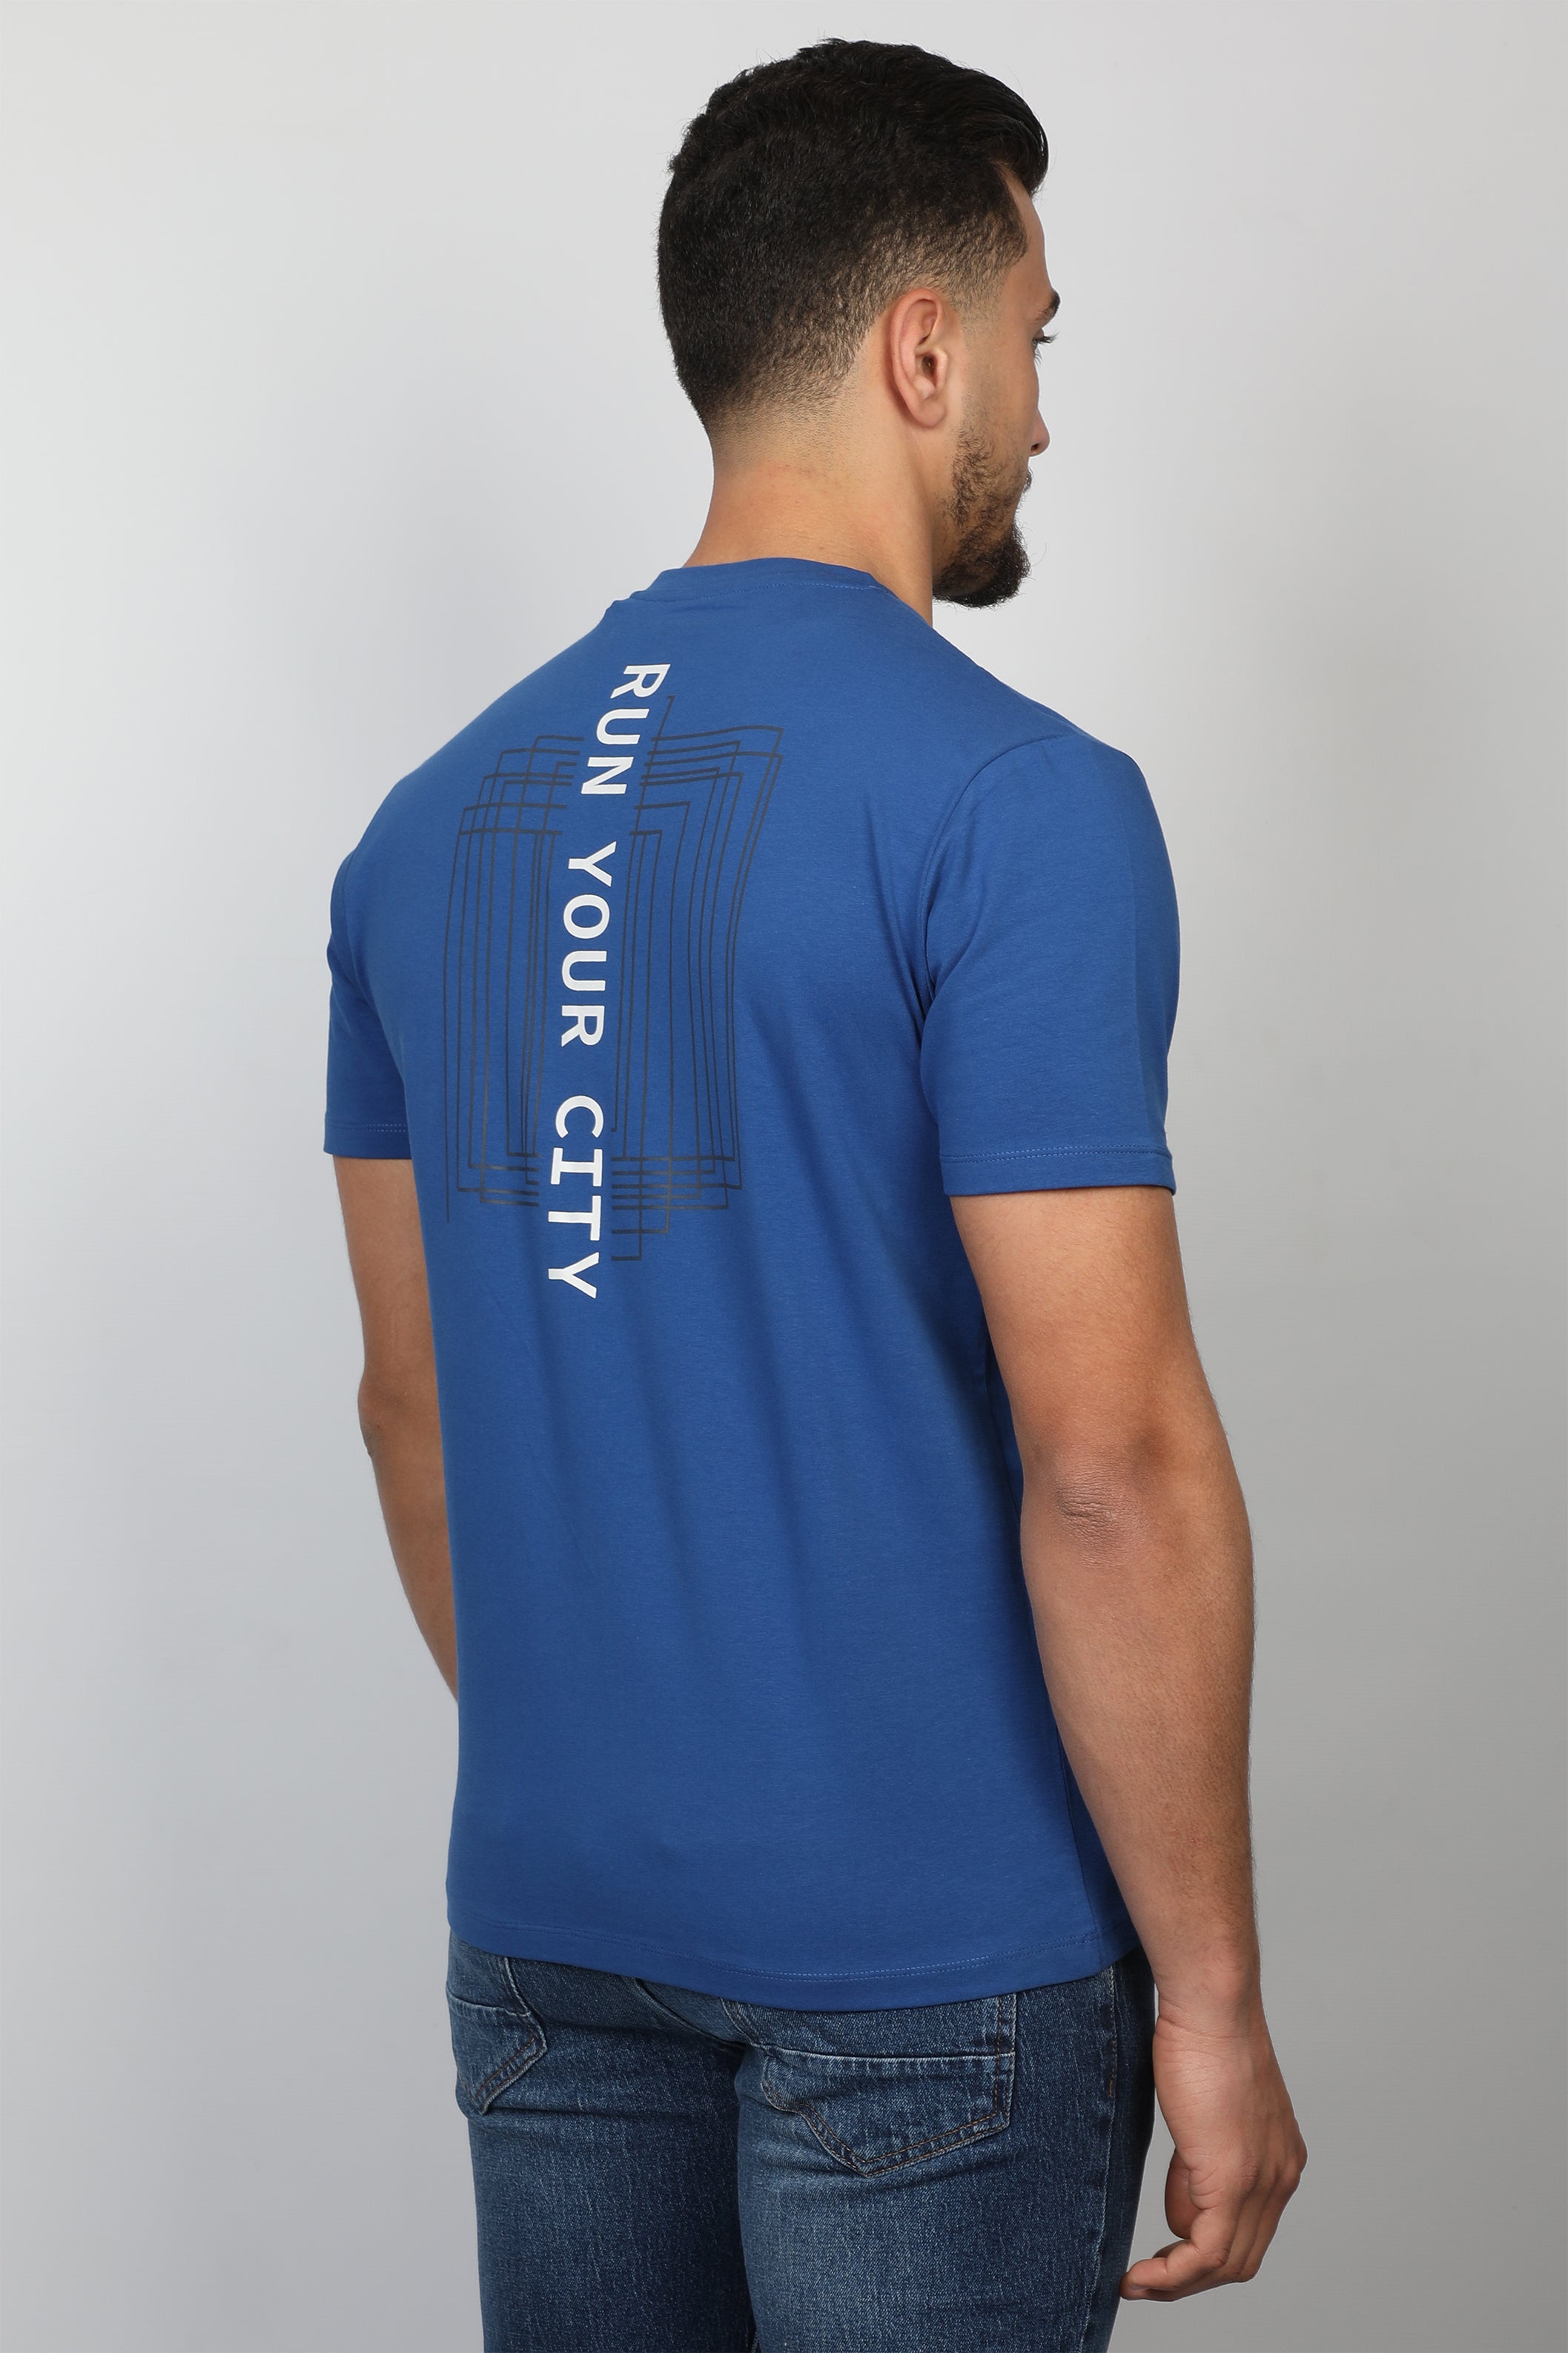 Blue T-shirt With Number Front Design And Back Logo